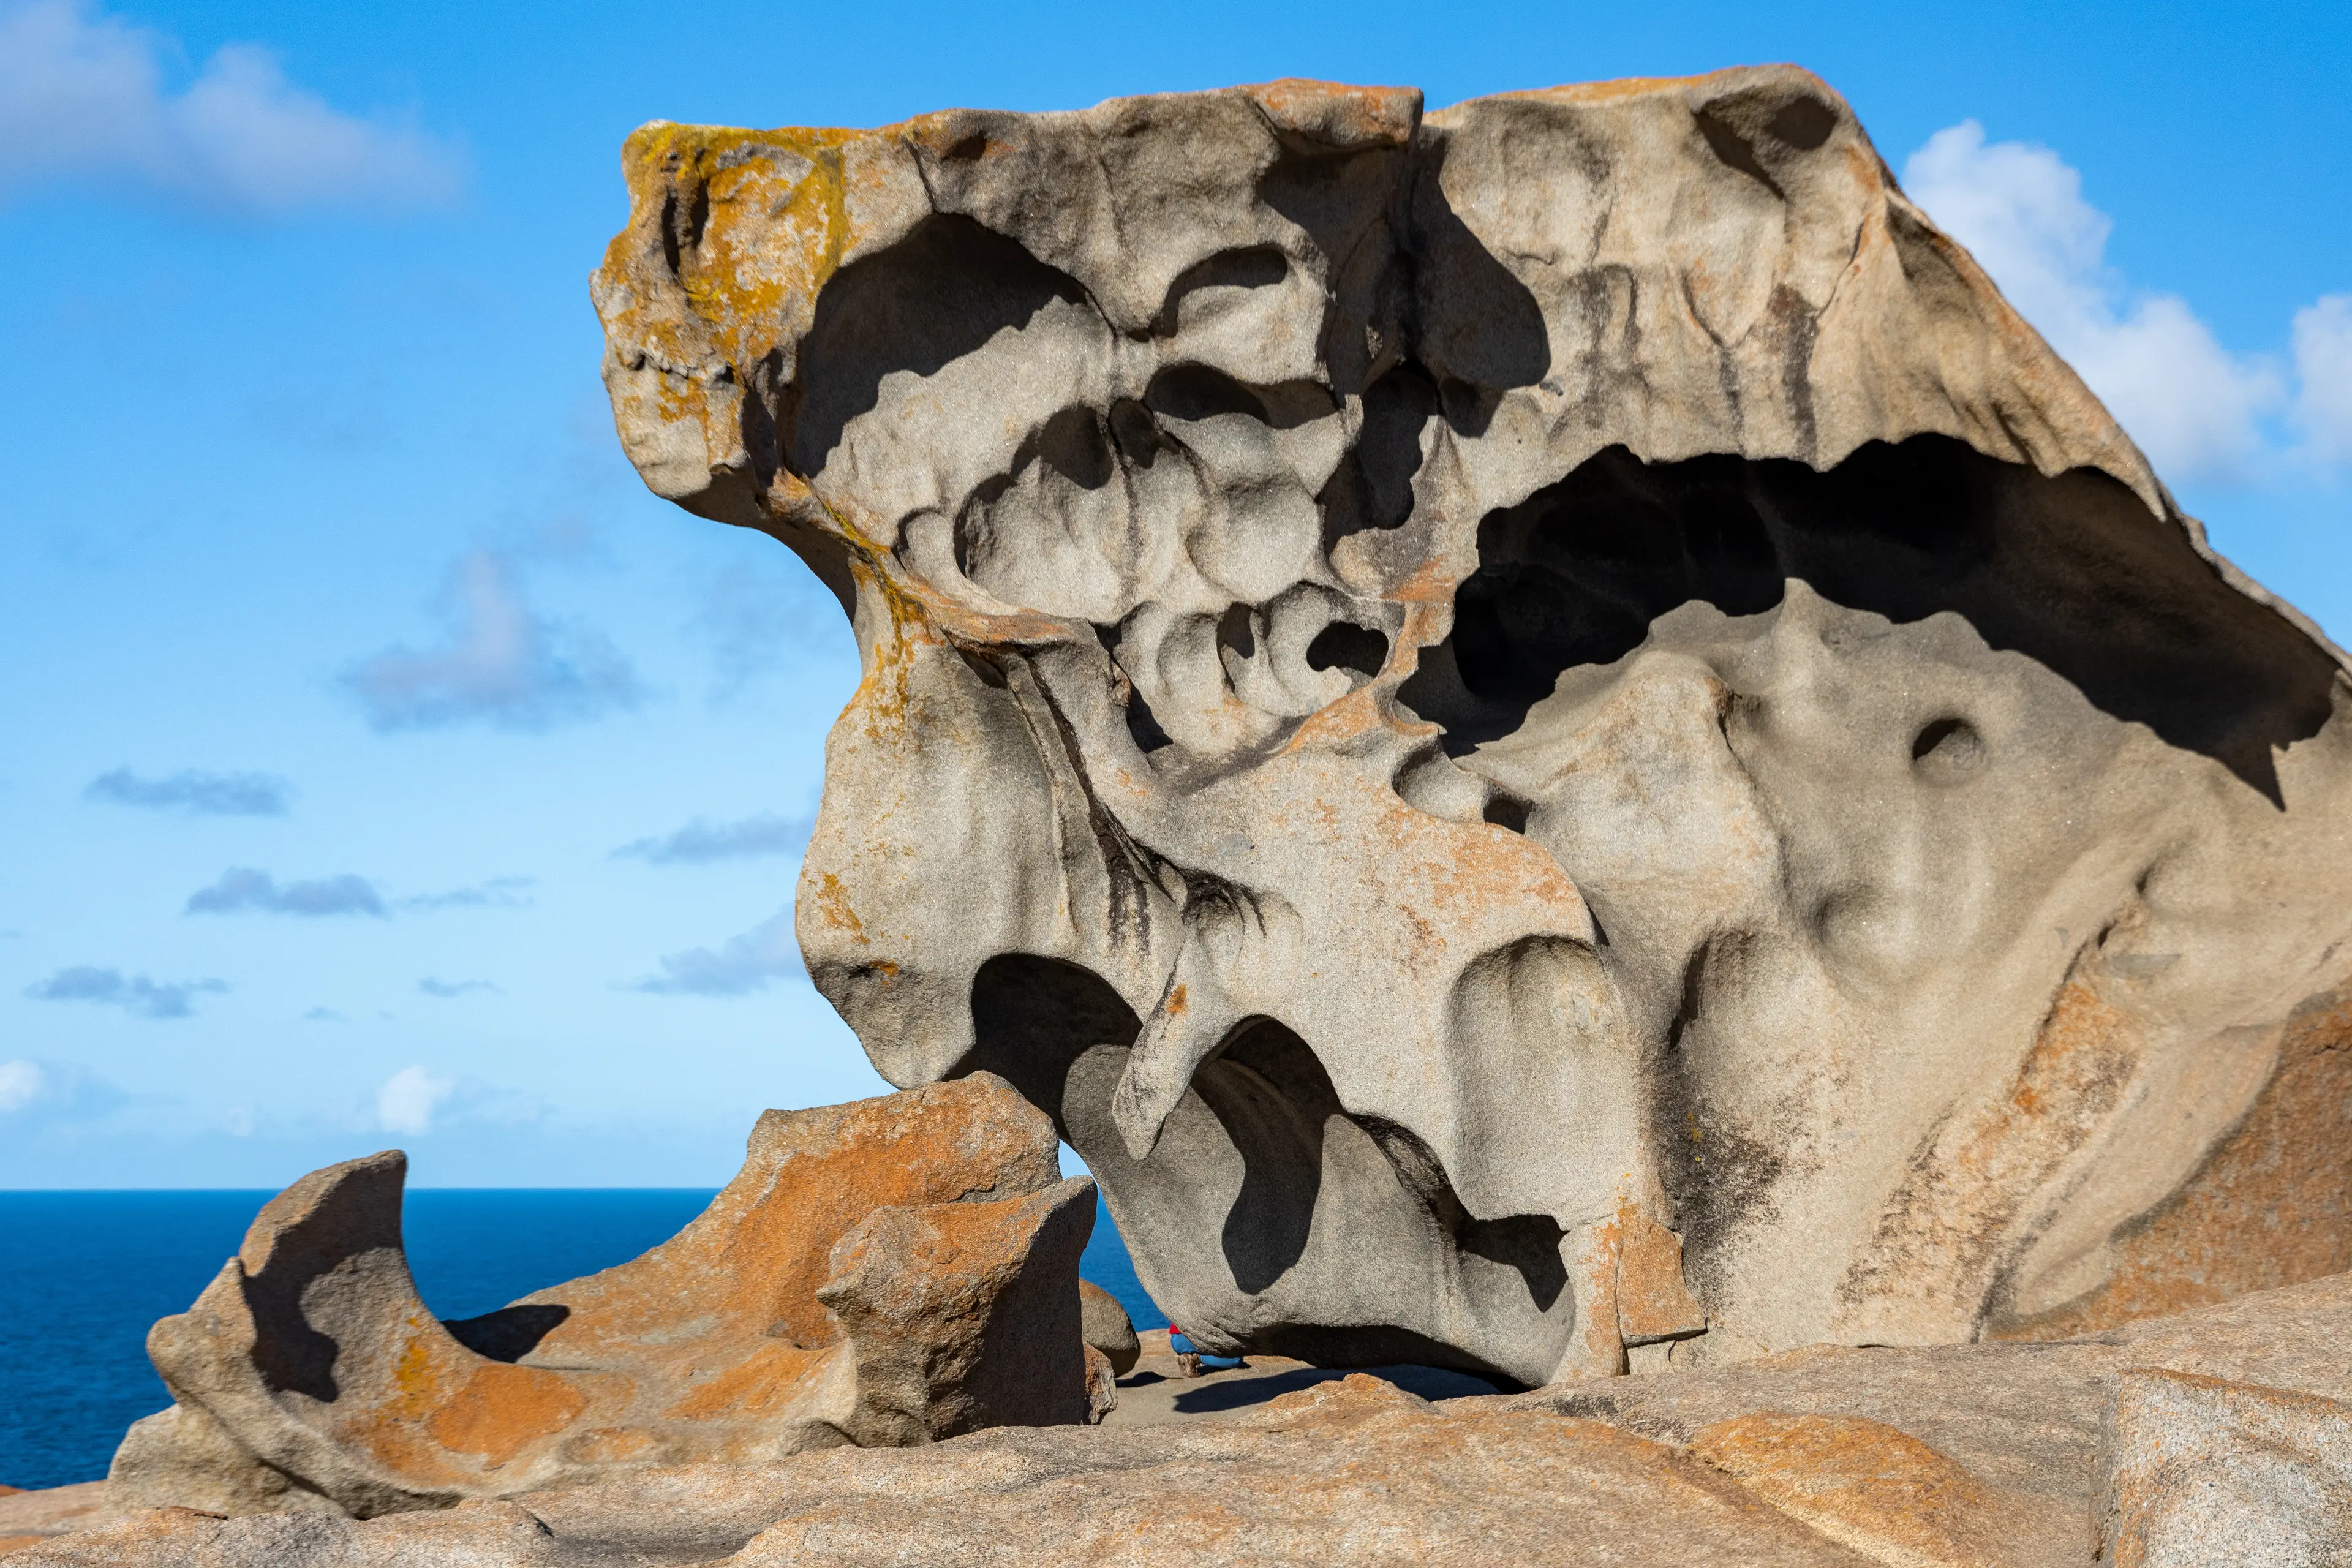 The iconic remarkable rocks in the Flinders Chase National Park